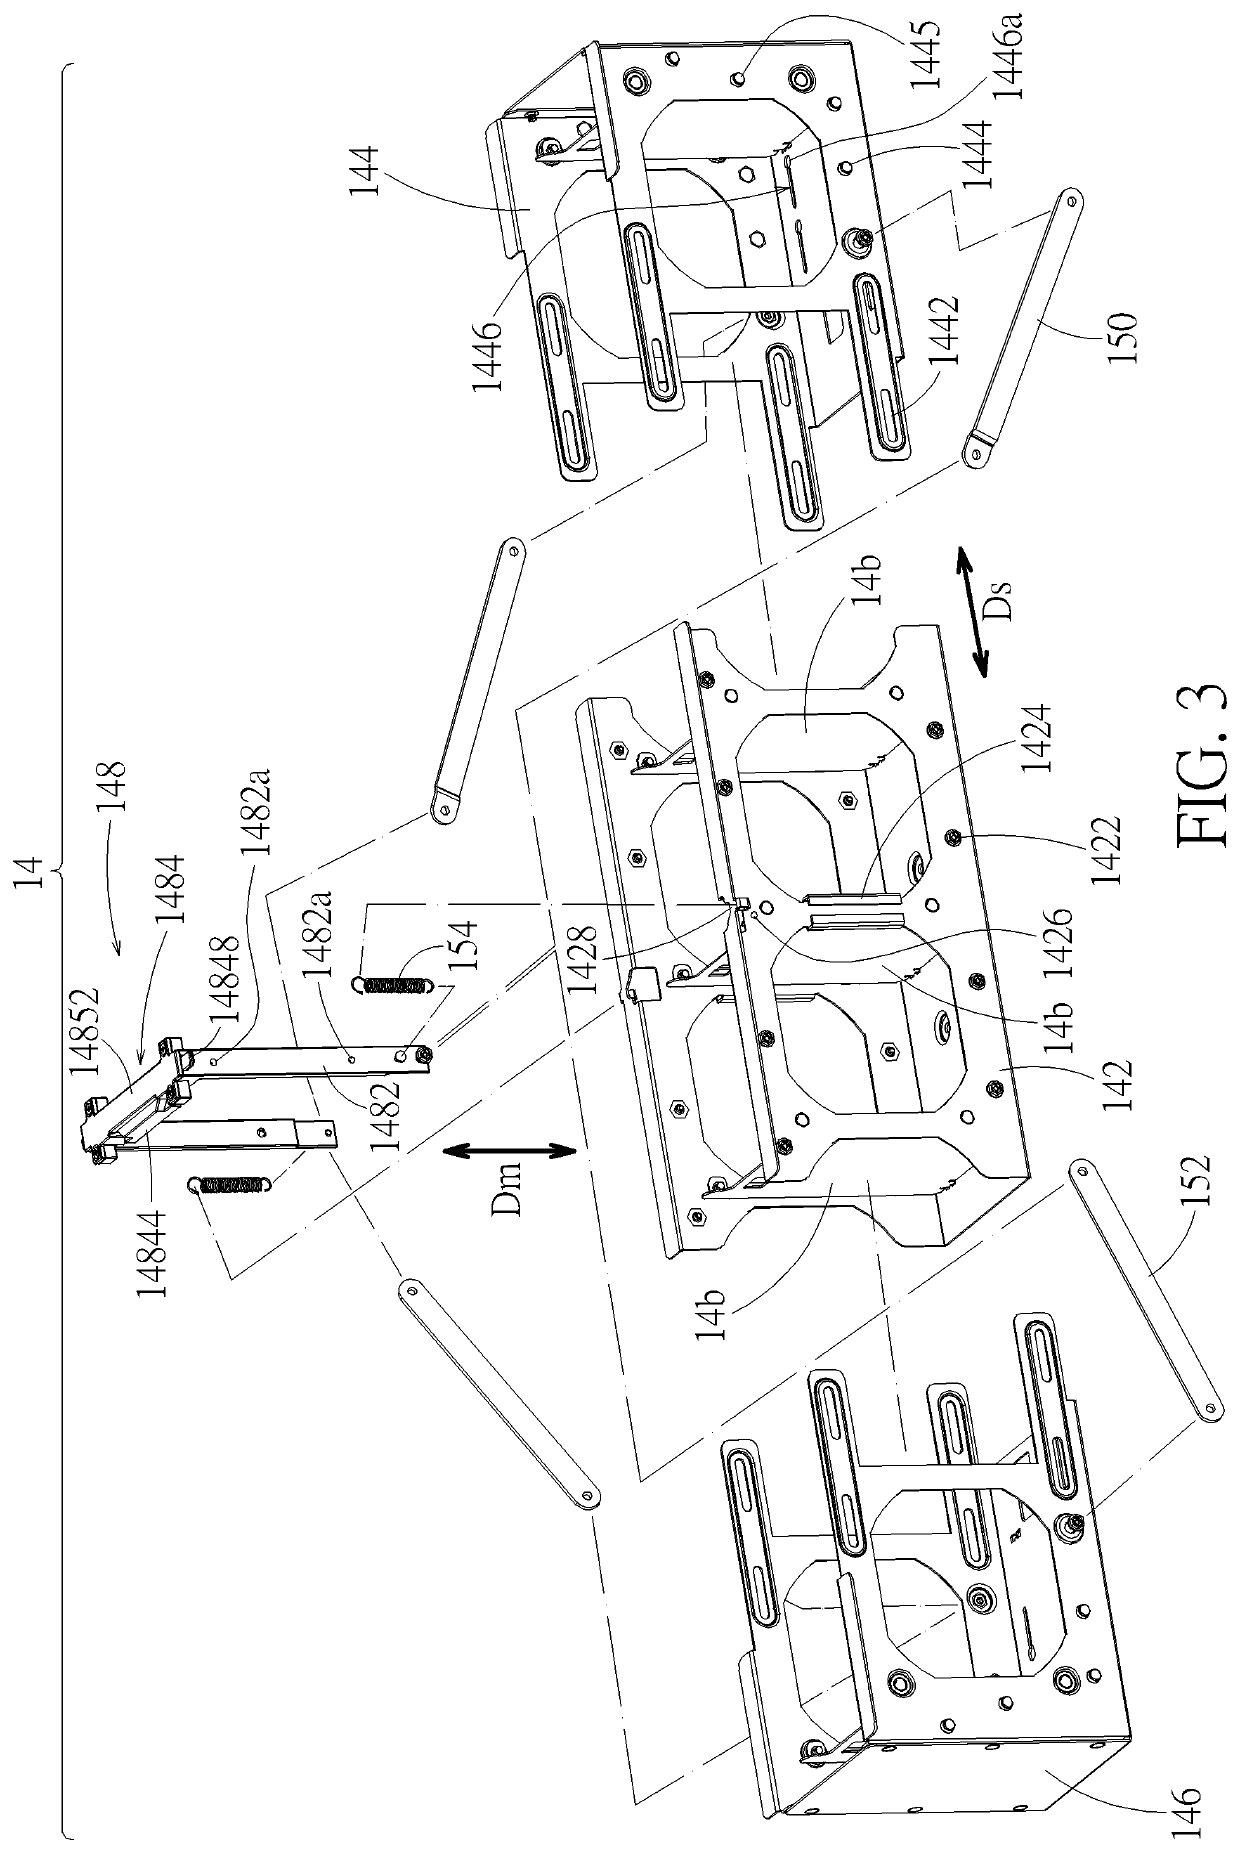 Telescopic fan cage and apparatus case therewith